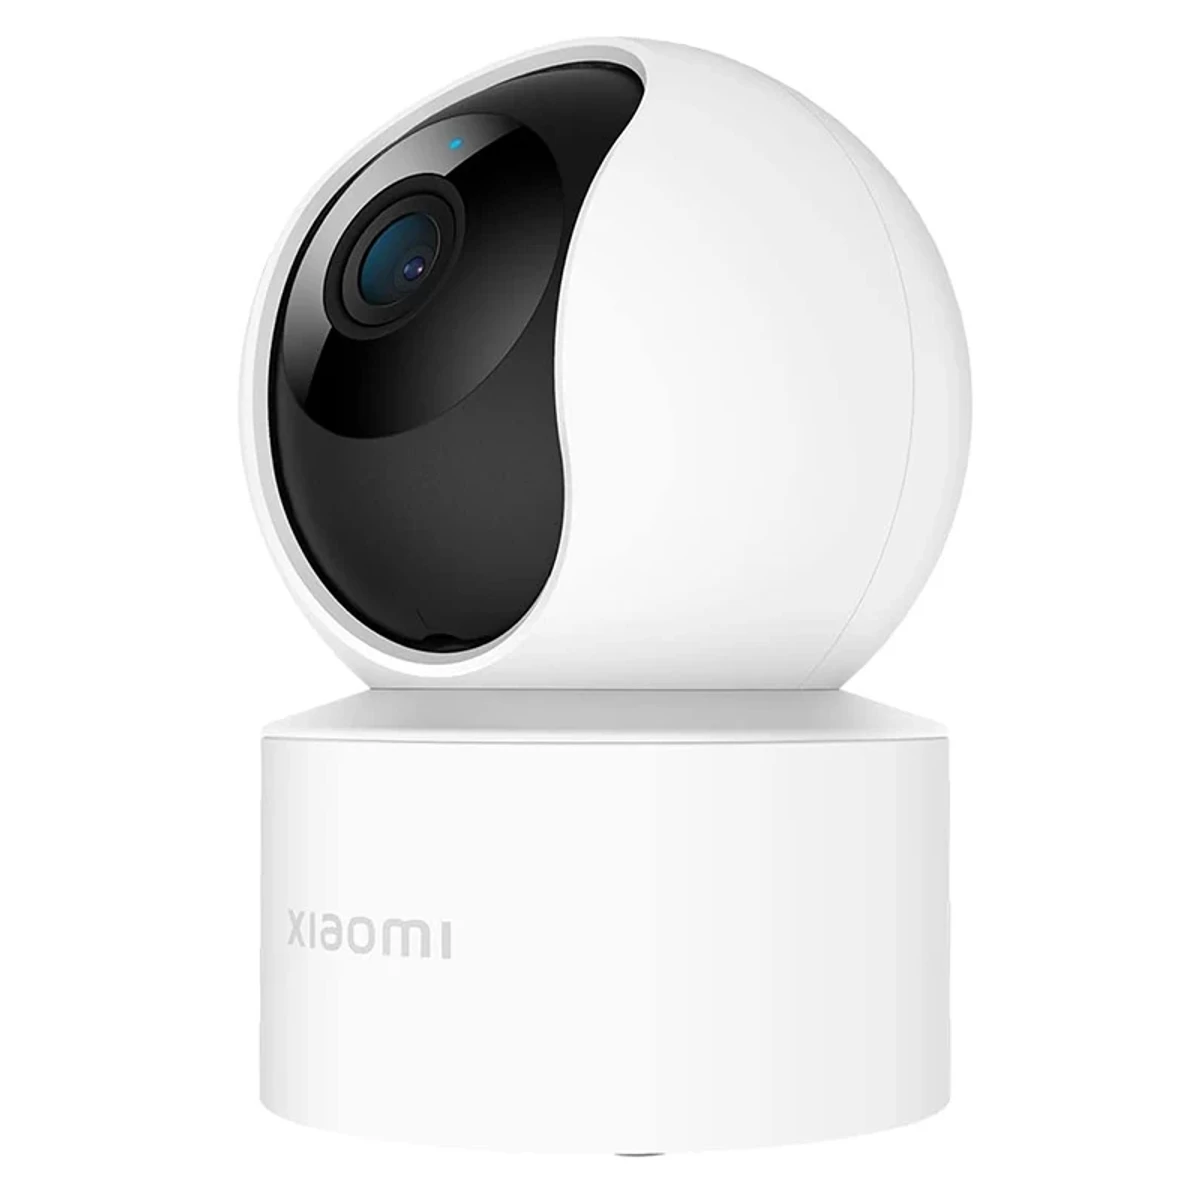 Xiaomi C200 360 Degree FHD (2.0MP) White Smart Home Security Wi-Fi Dome IP Camera MJSXJ14CM (without Adapter)